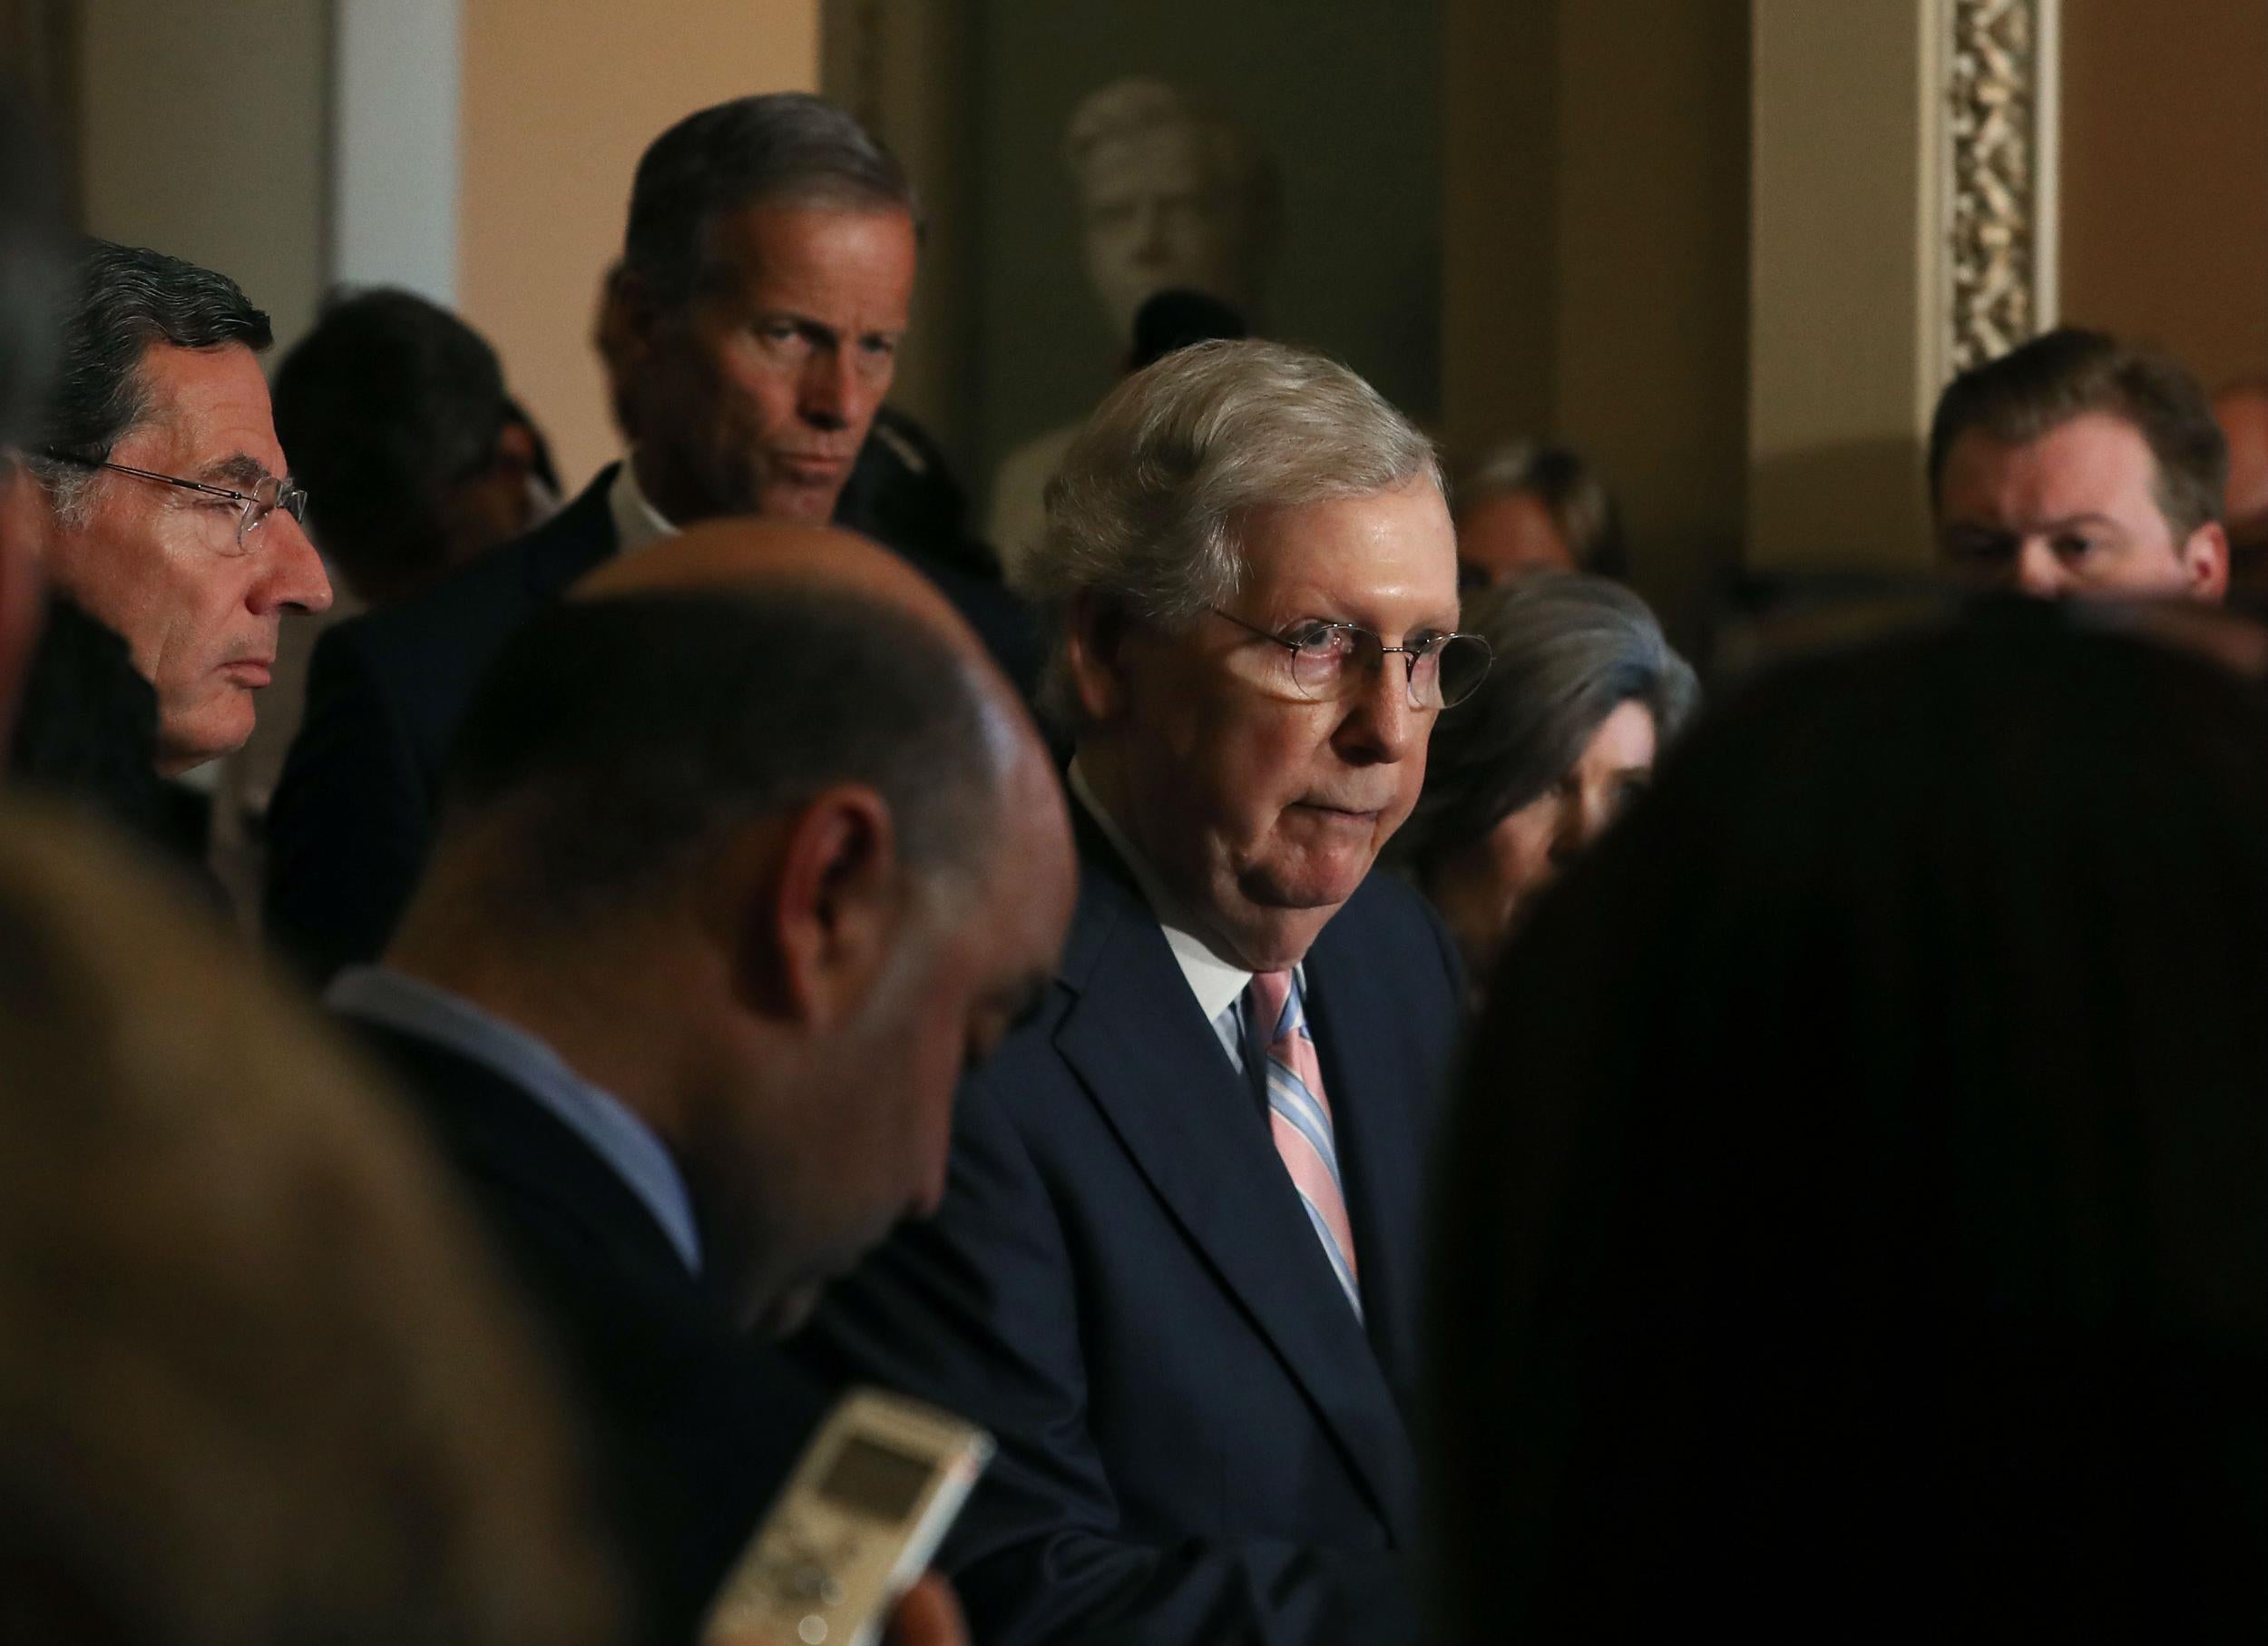 Mitch McConnell: Top Trump ally angrily hits back at 'modern-day McCarthyism' amid row over election security and Russia